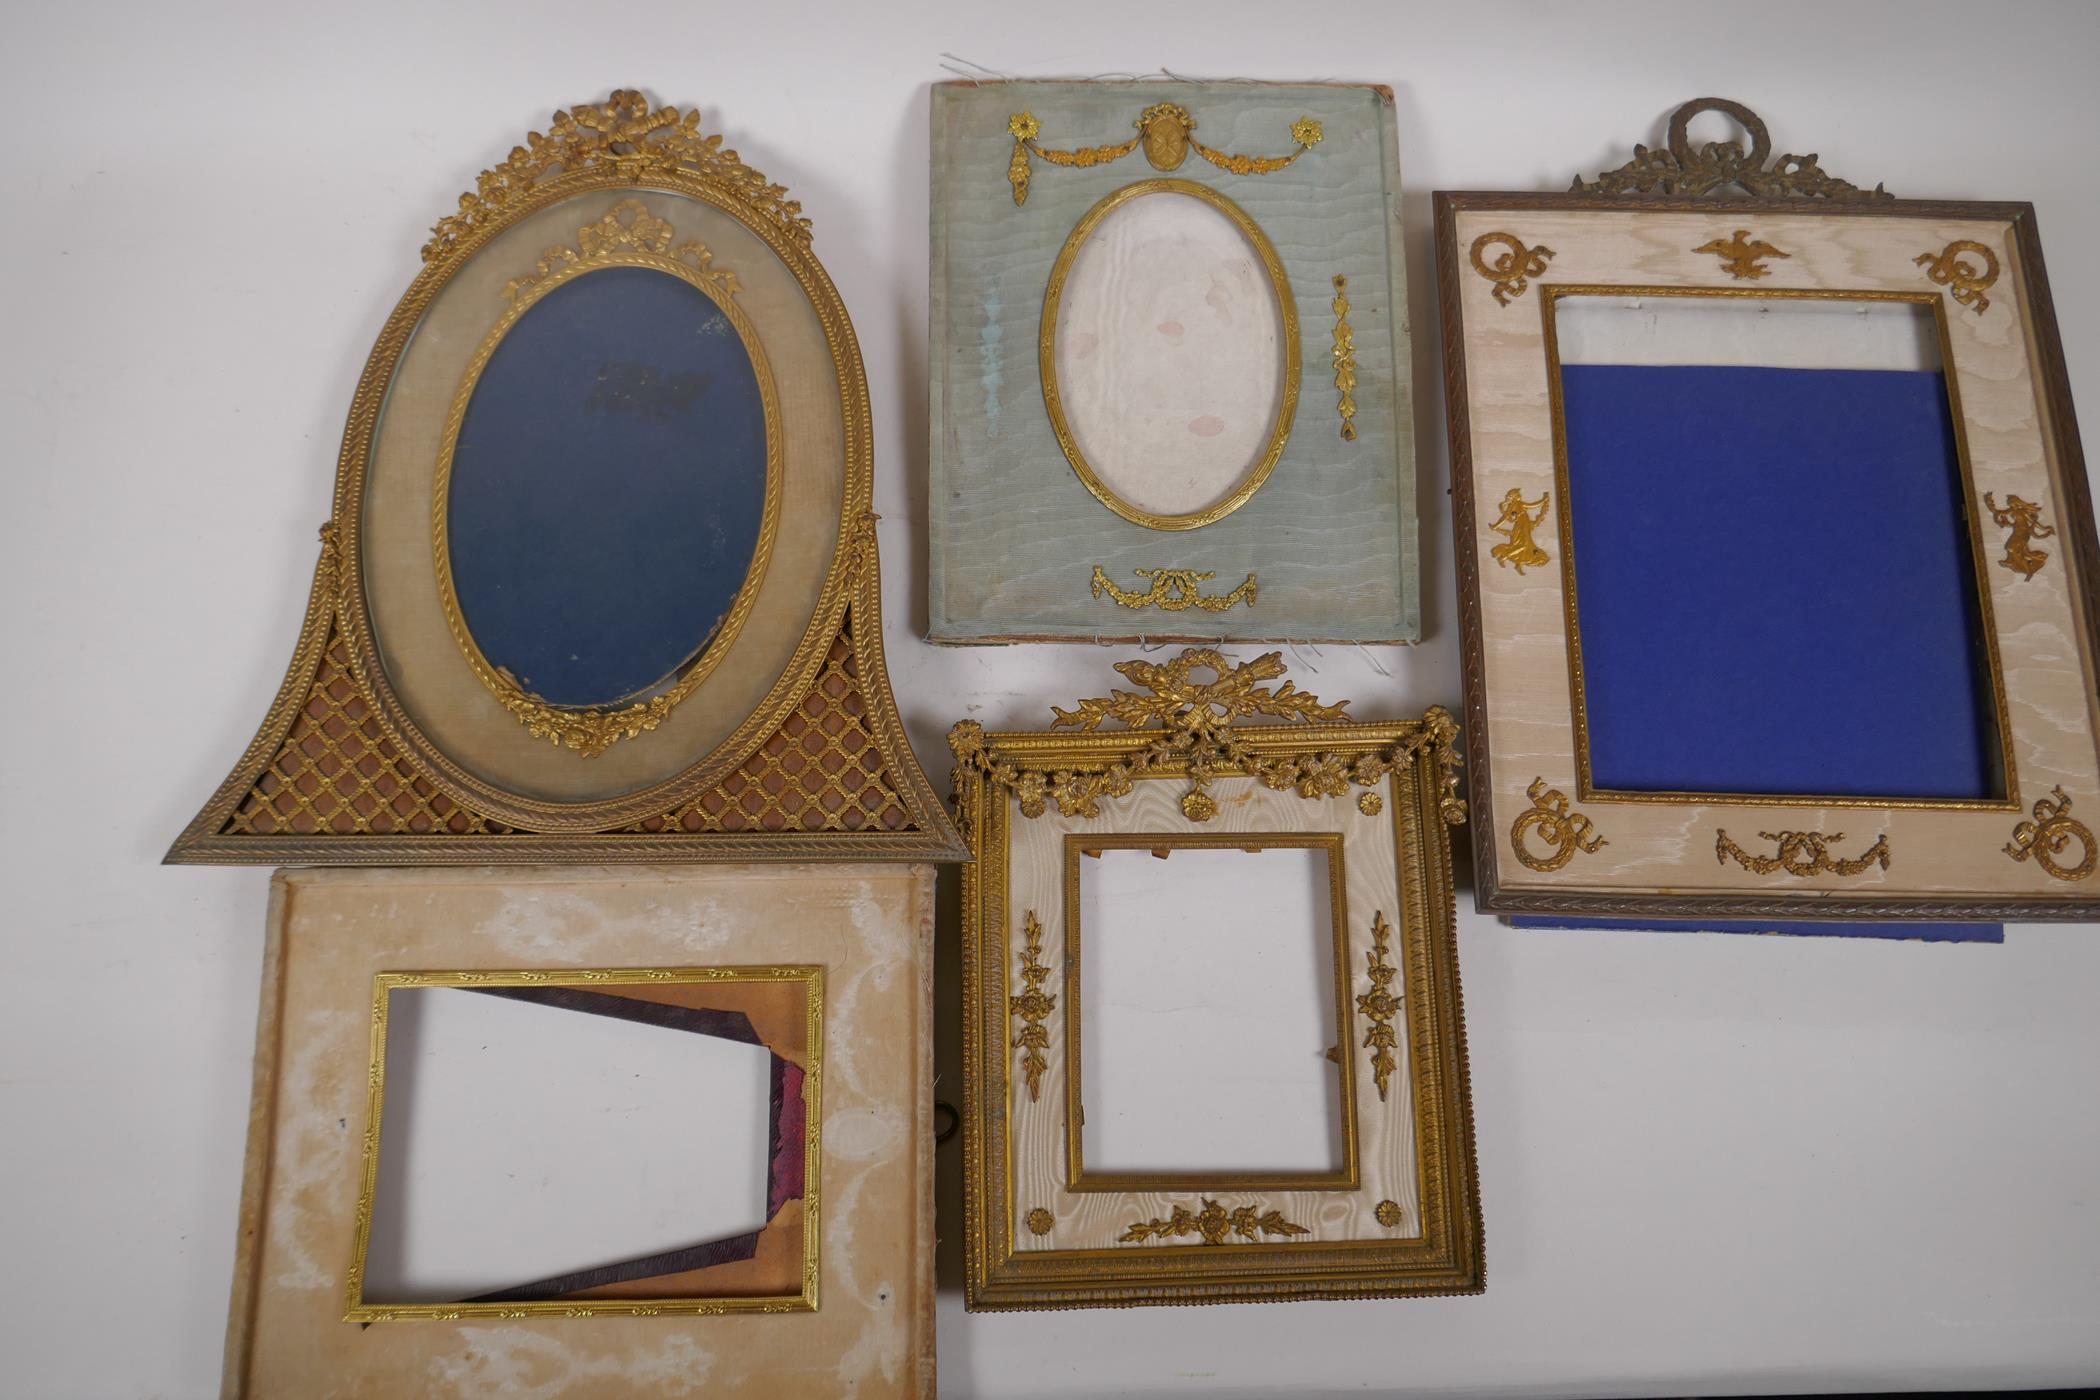 A brass and ormolu photo frame with Empire style decoration and watered silk border, late C19th/